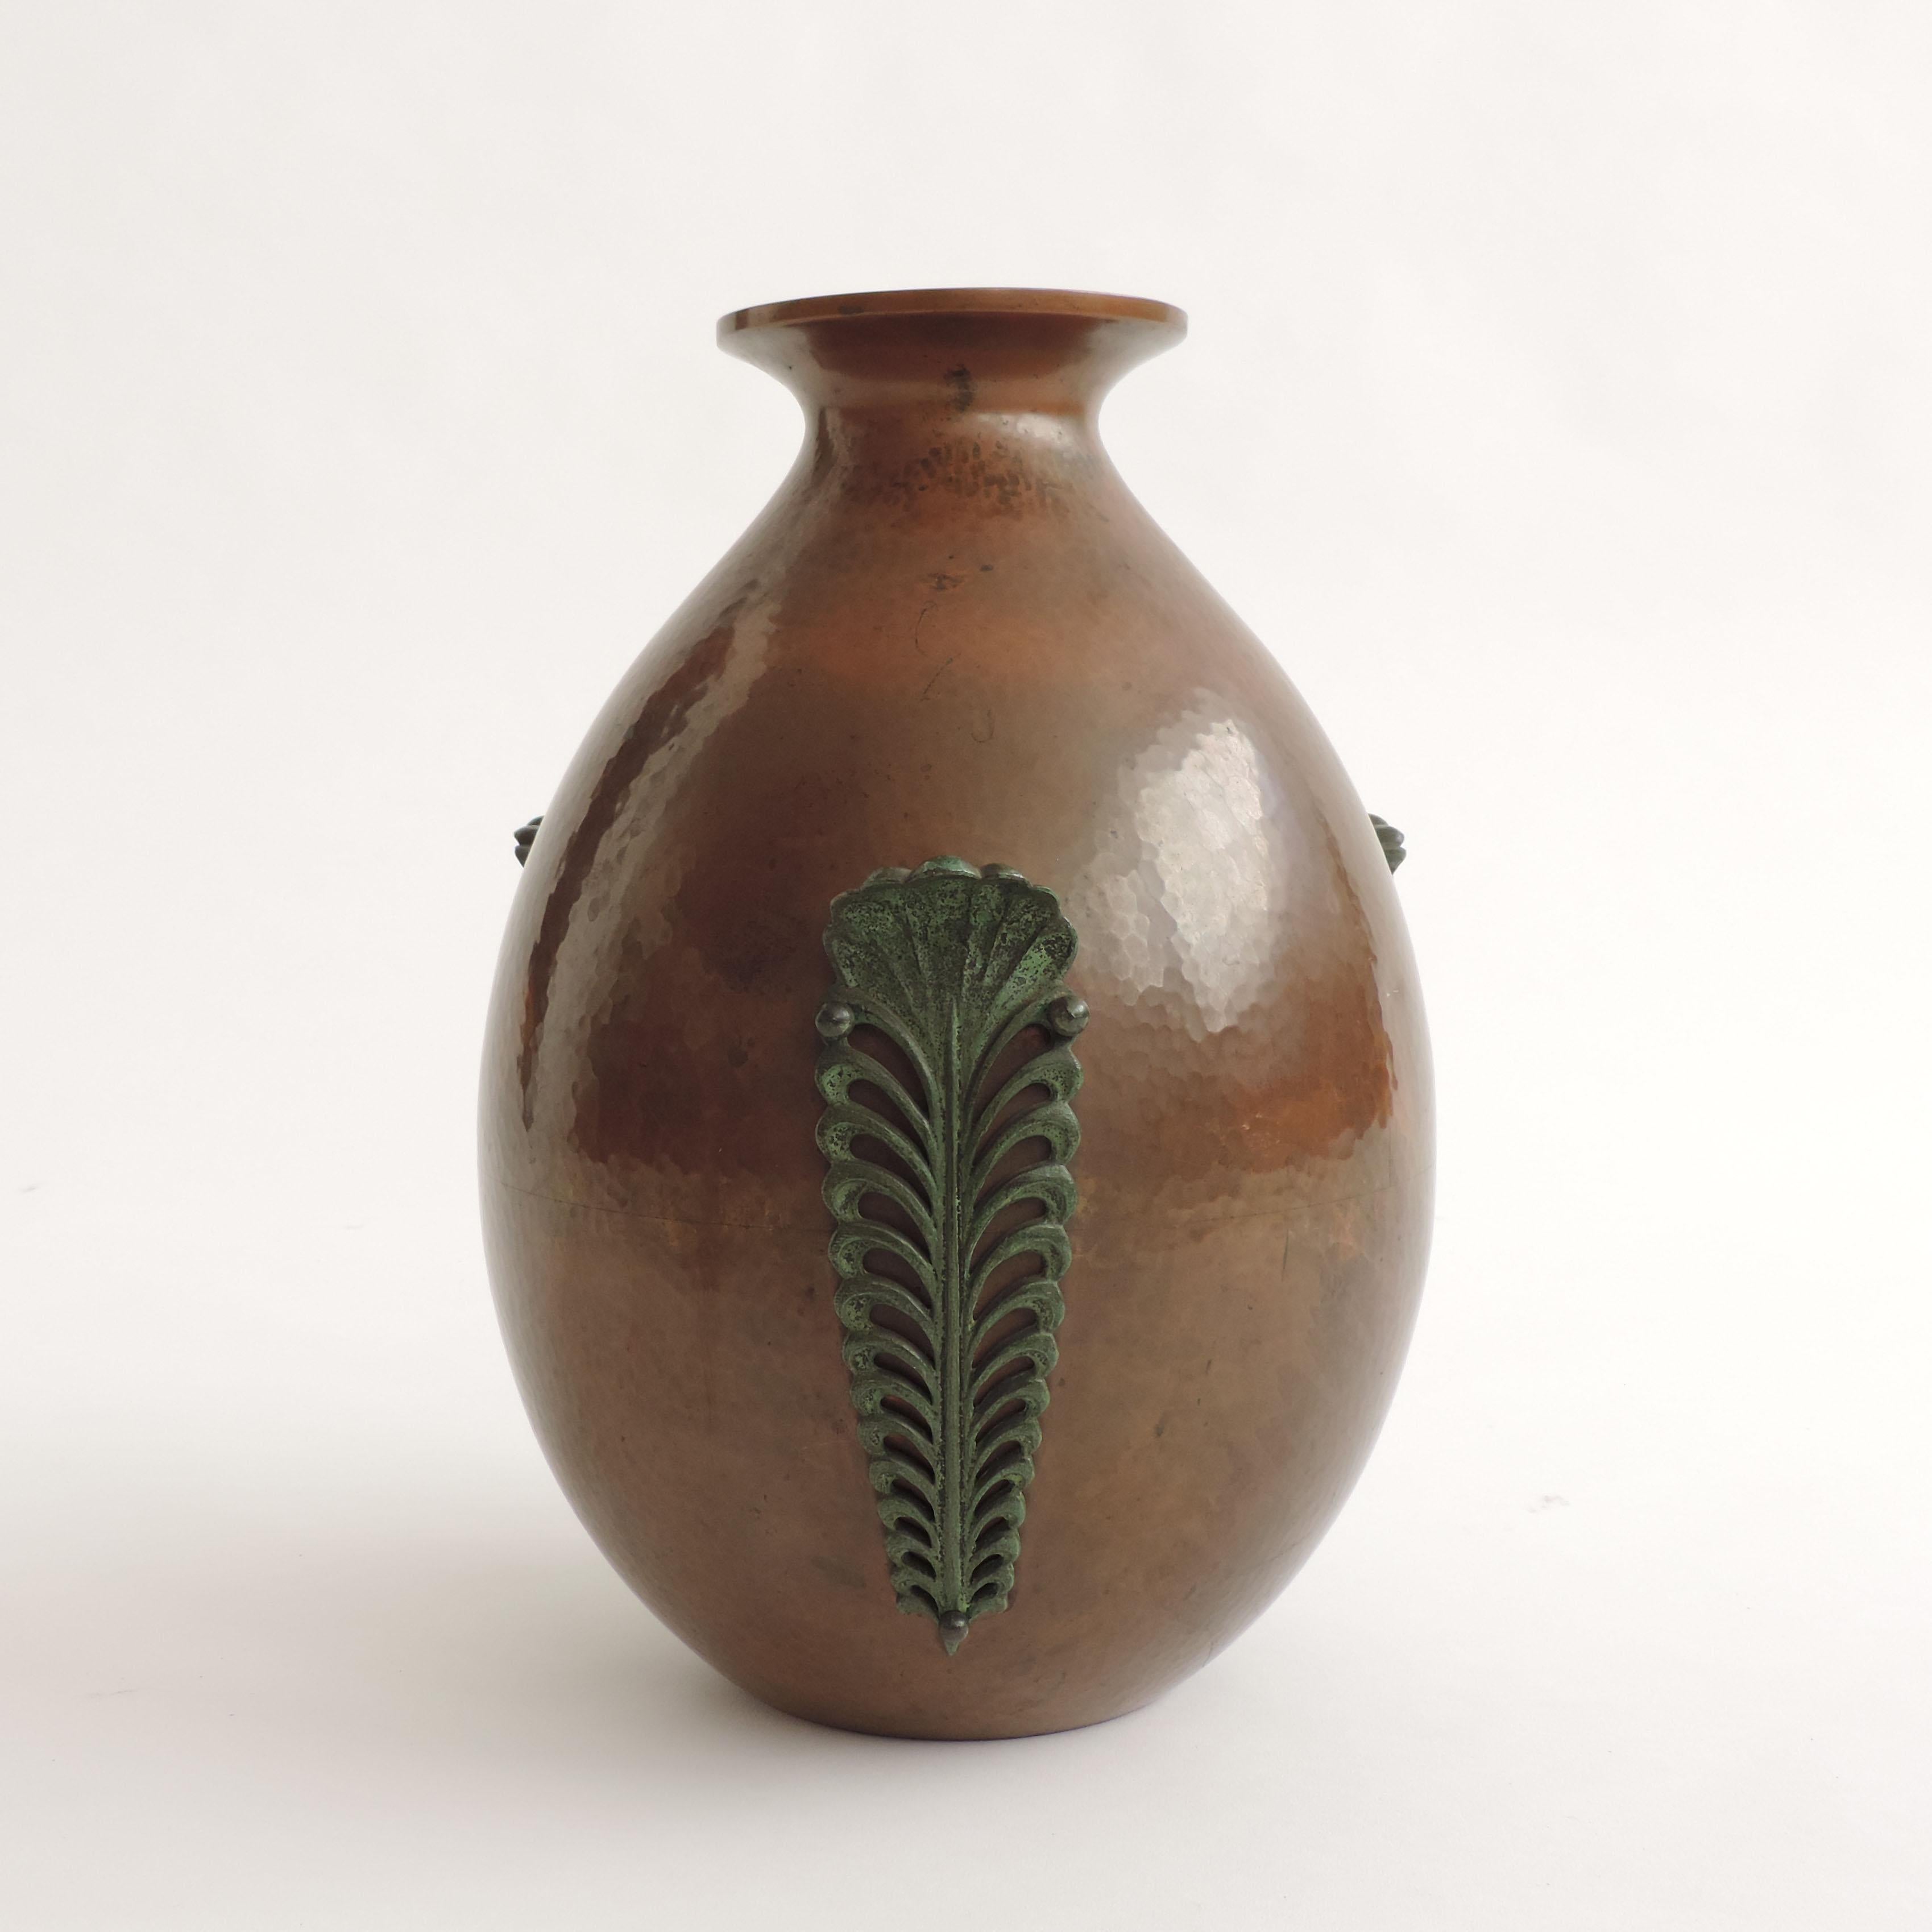 Italian 1930s Hammered Copper Vase with Three Metal Decorative Leaves Applied For Sale 4